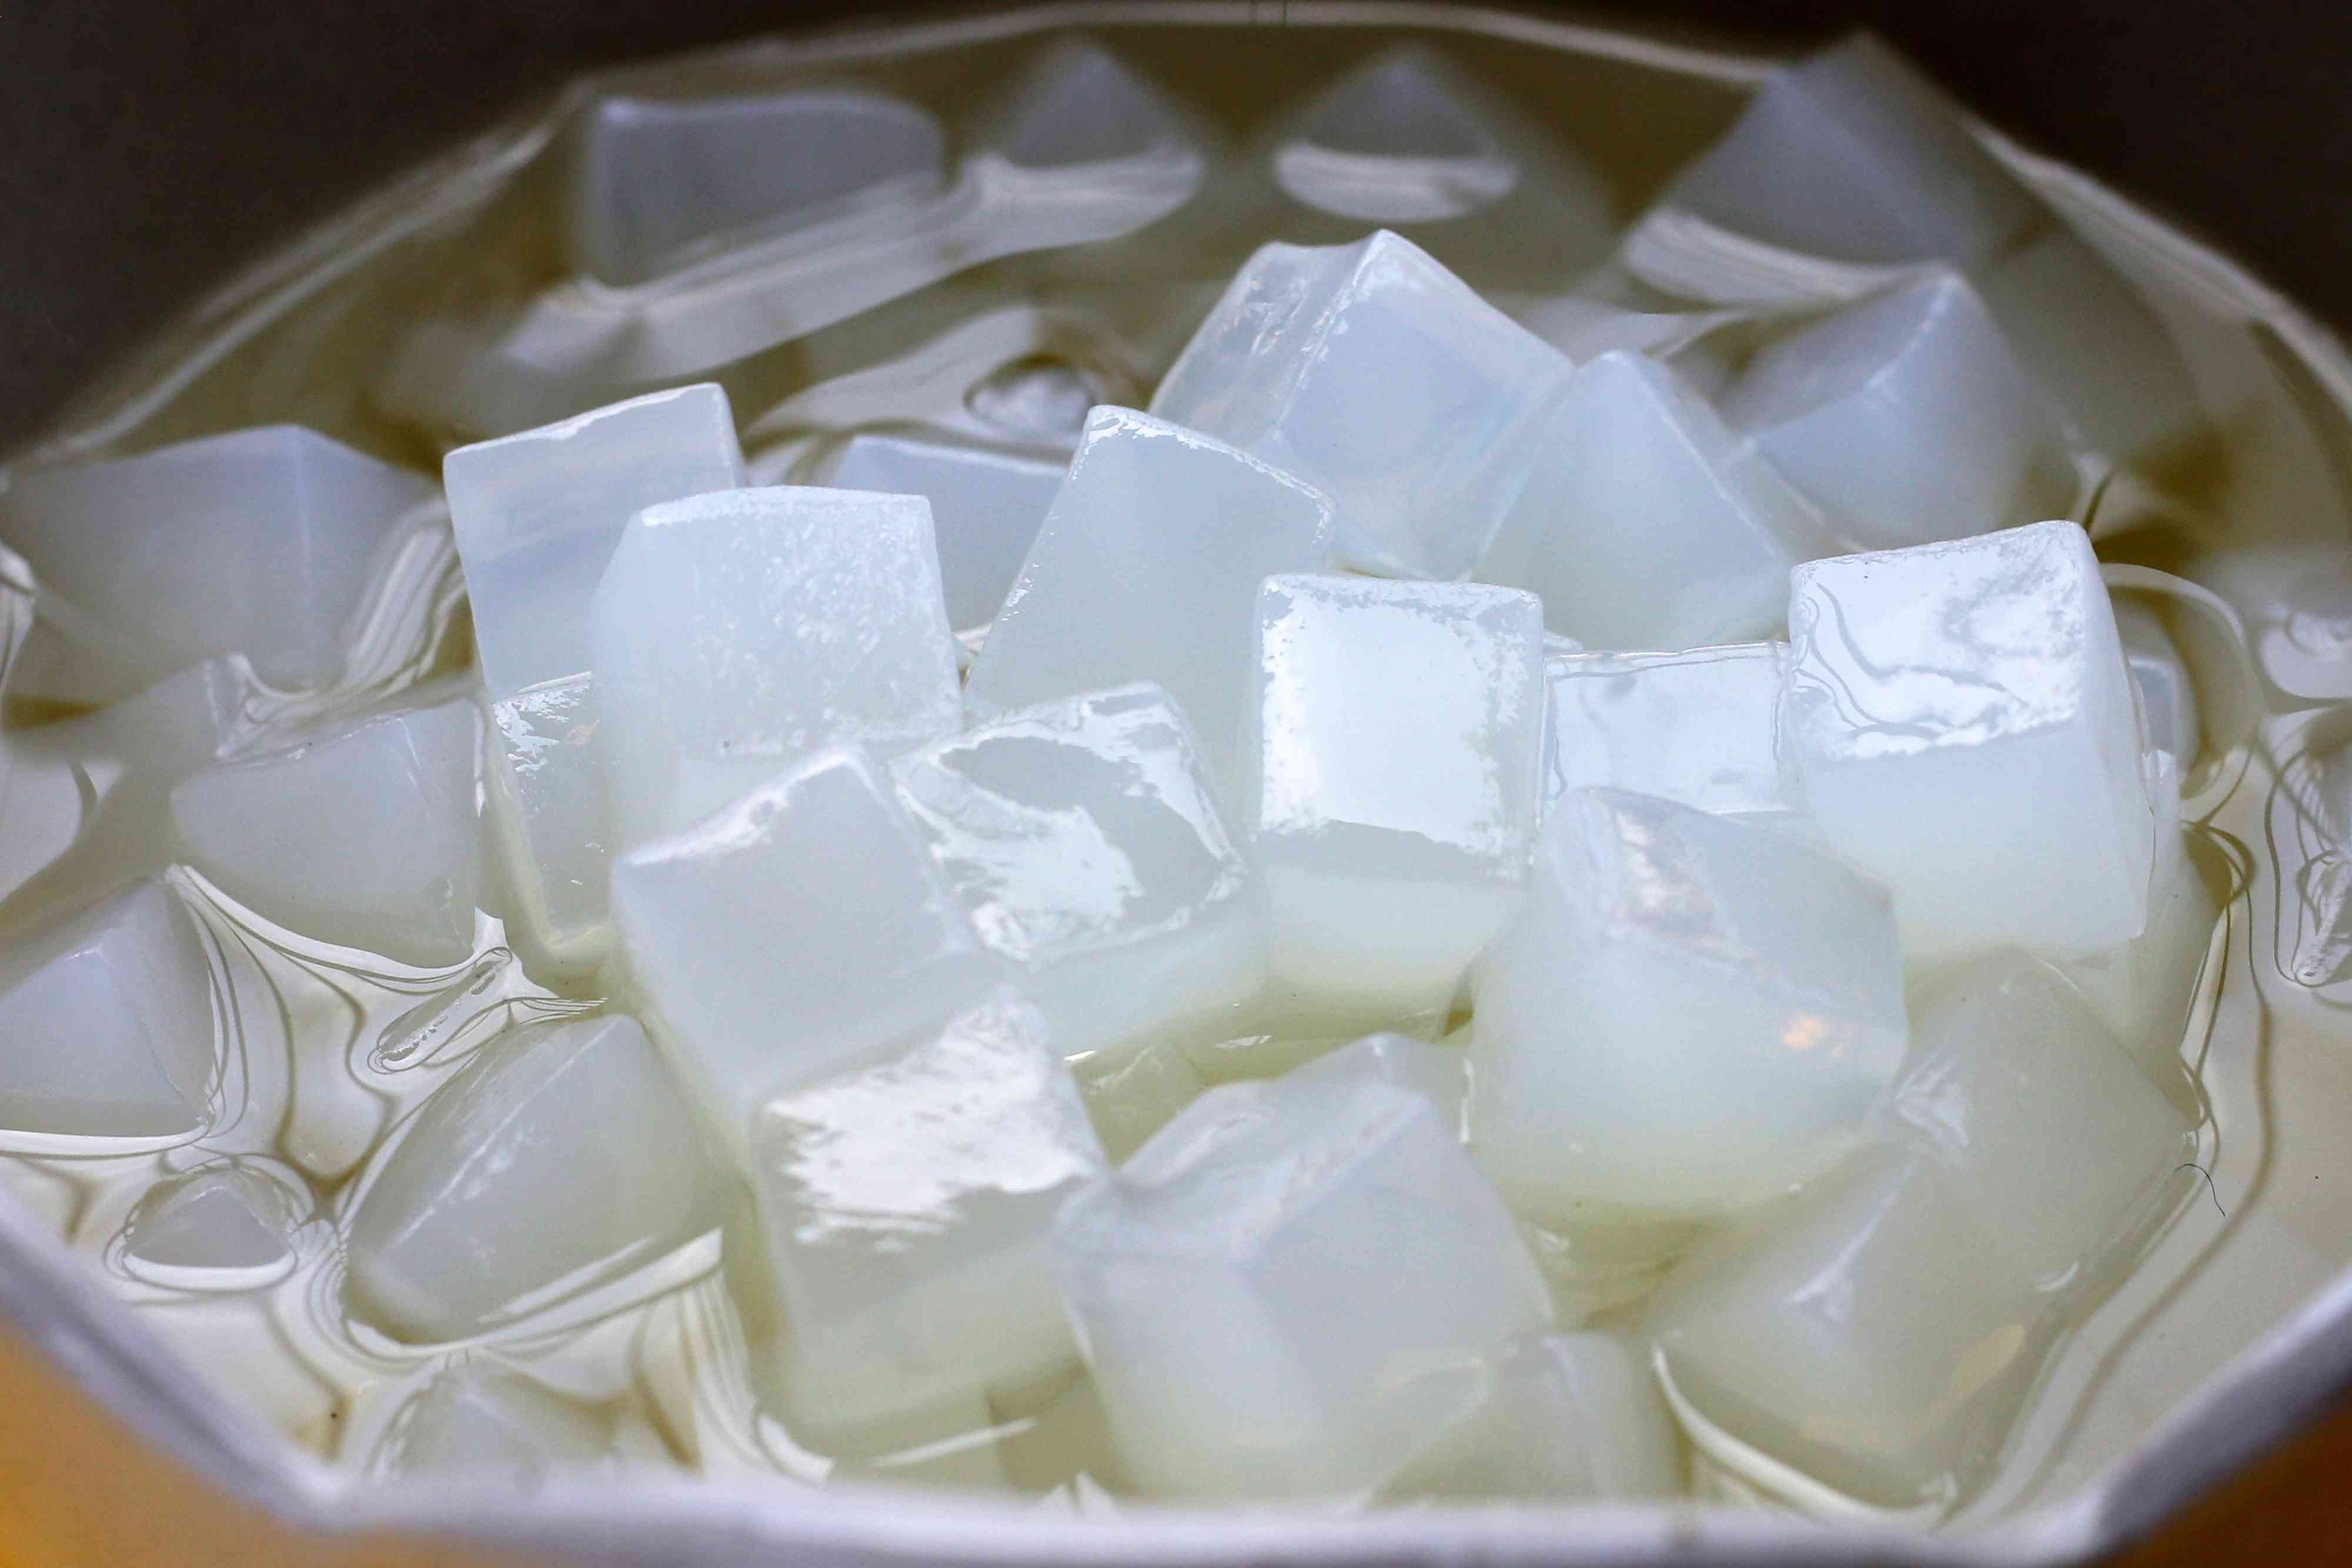 If You’re a Fan of Coconut, Nata de Coco Needs to Be In Your Next Dessert